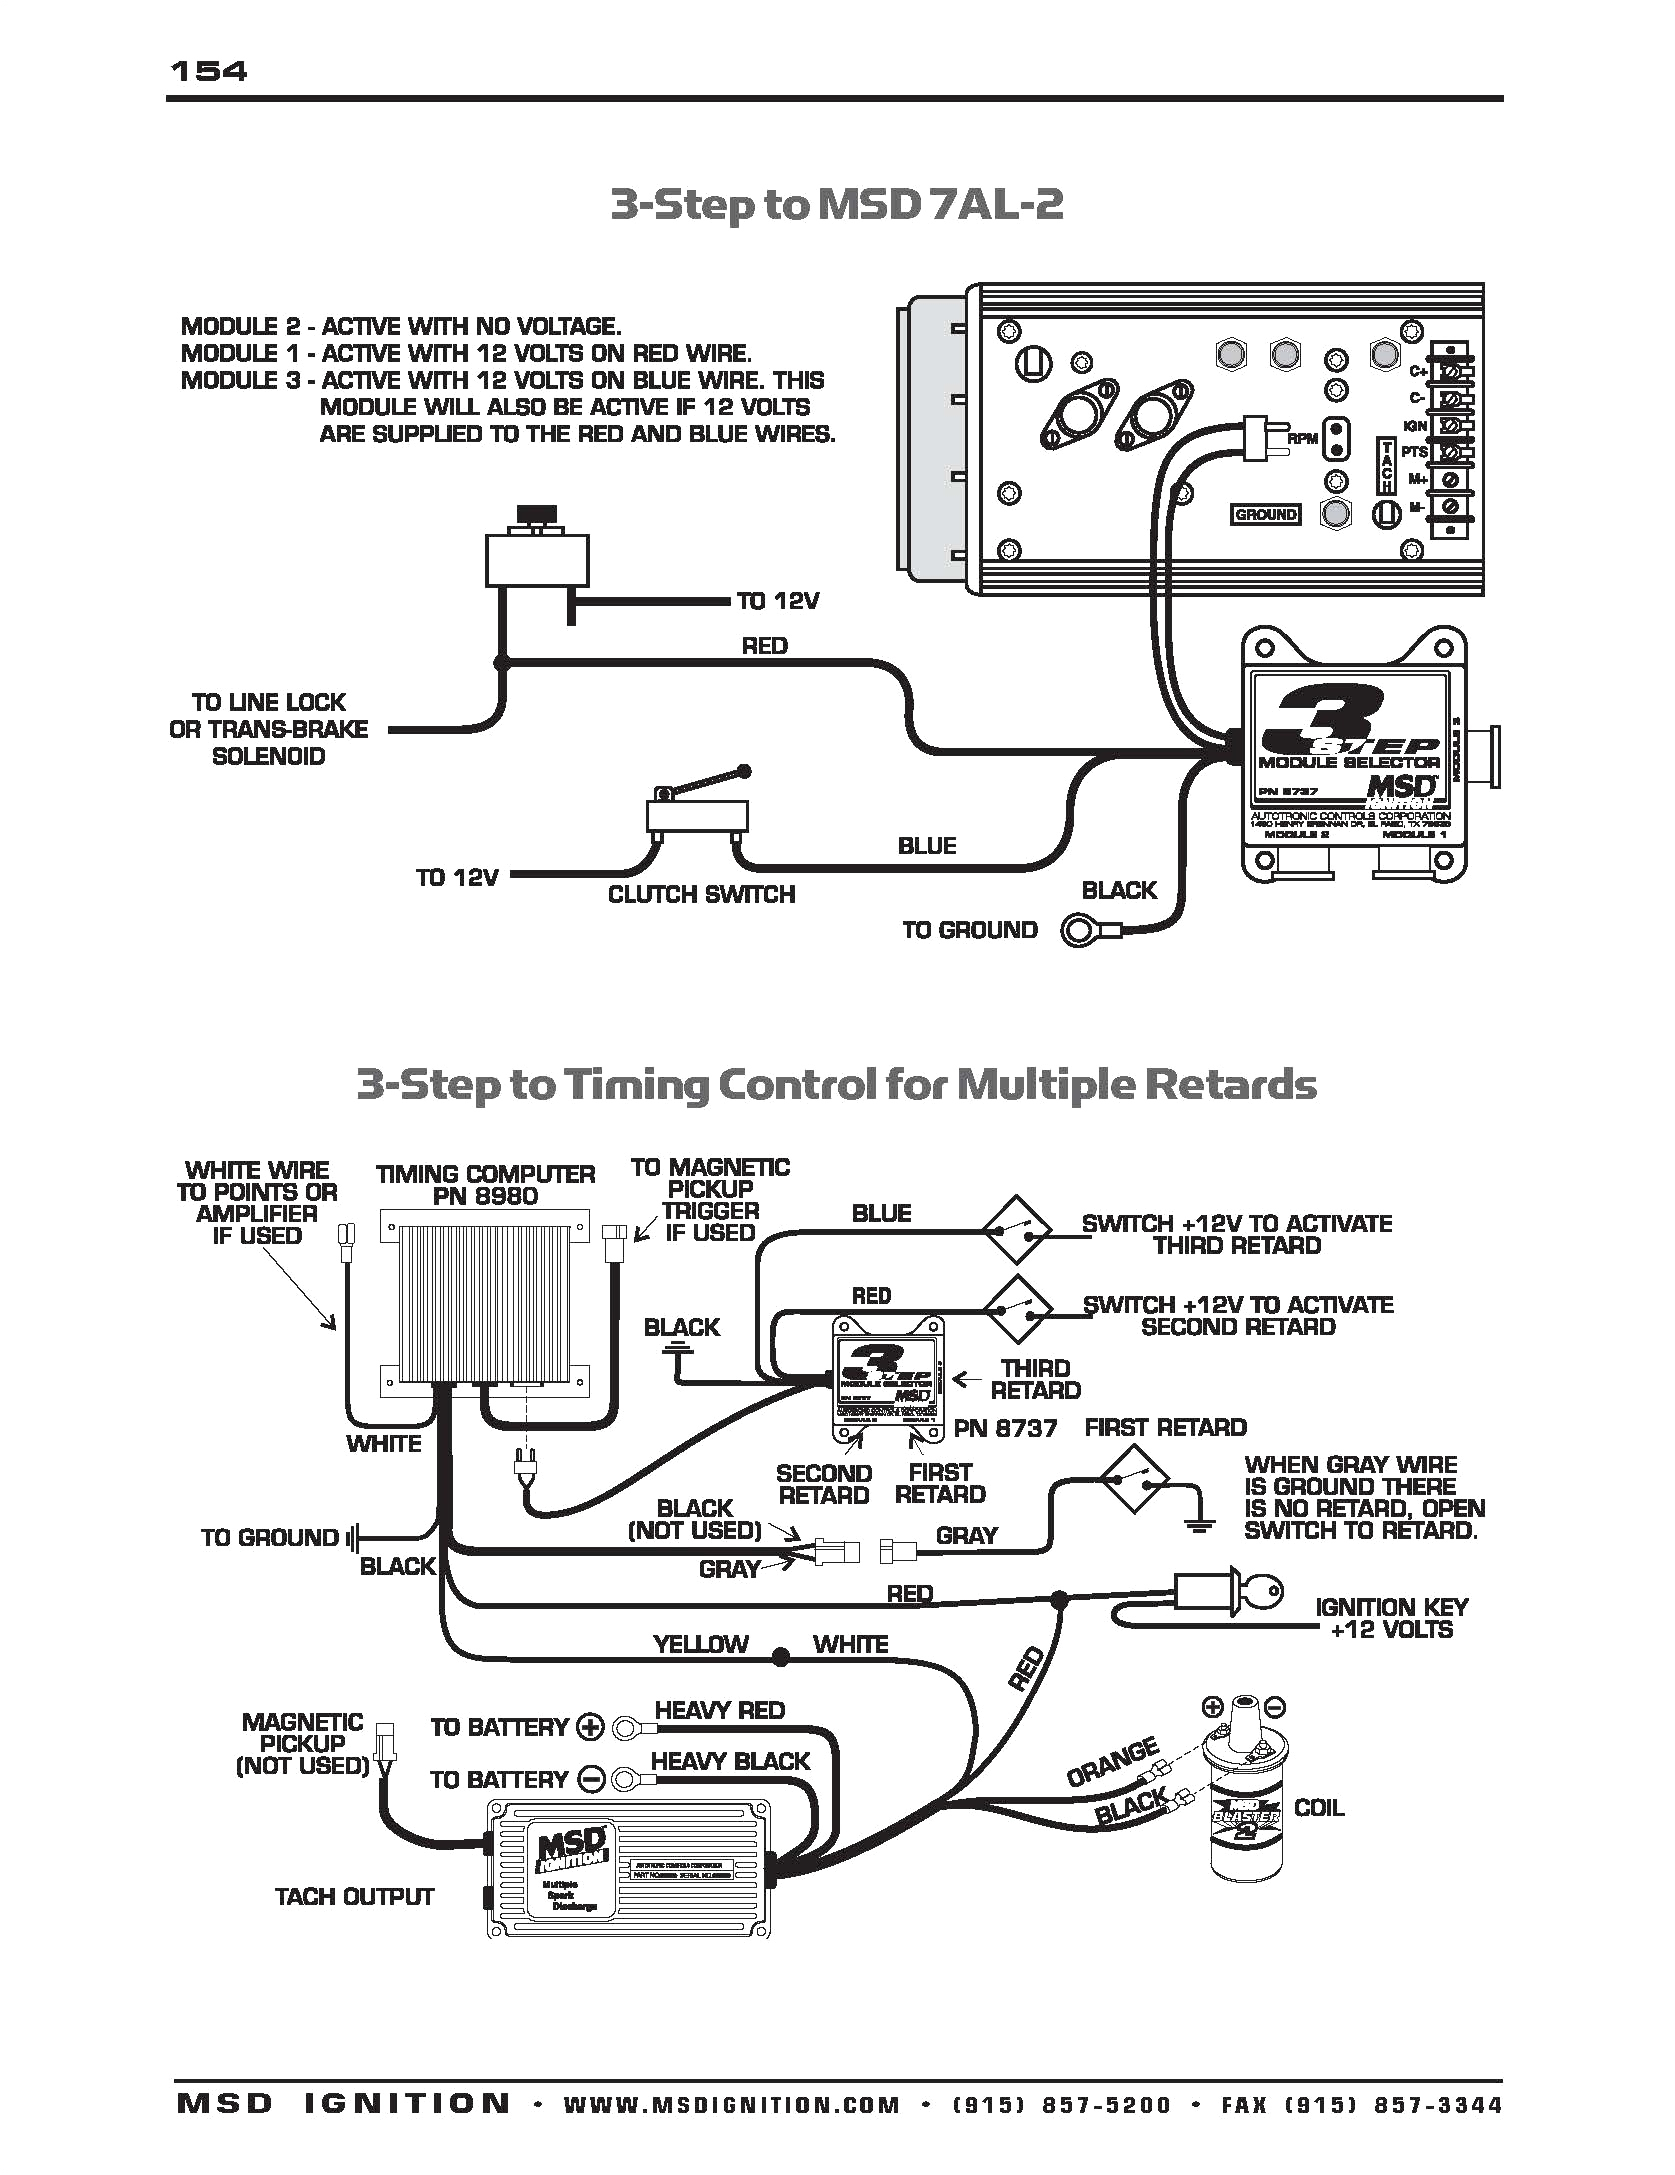 s10 wiring diagram pdf beautiful 1997 chevy s10 fuse box diagram s10 ignition switch wiring diagram